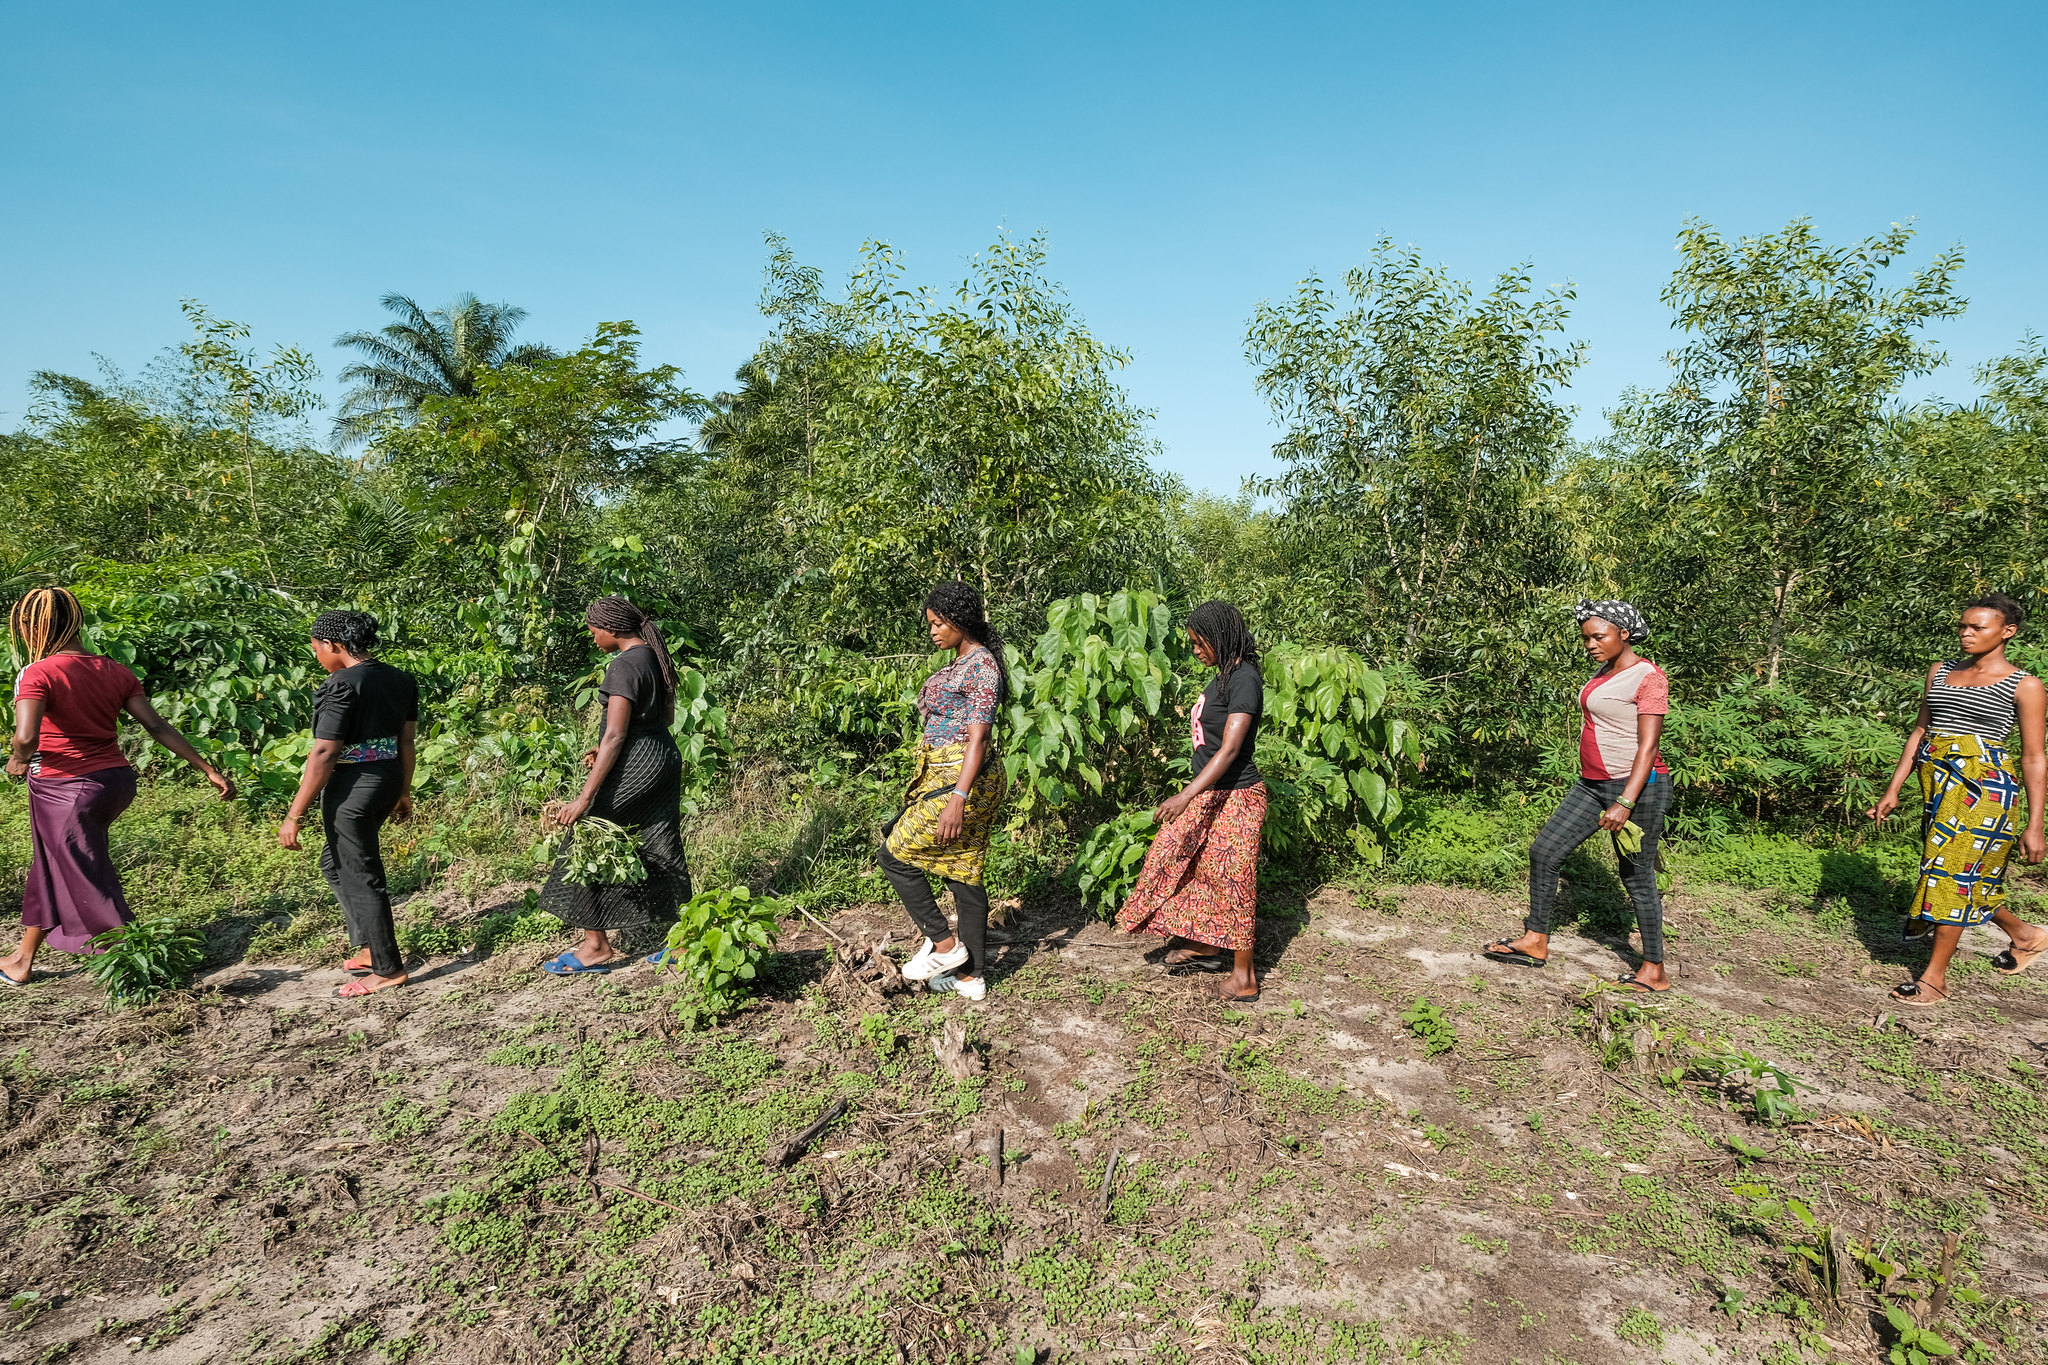 drc women's association takes charge of the future, supporting others to do the same - cifor forests news